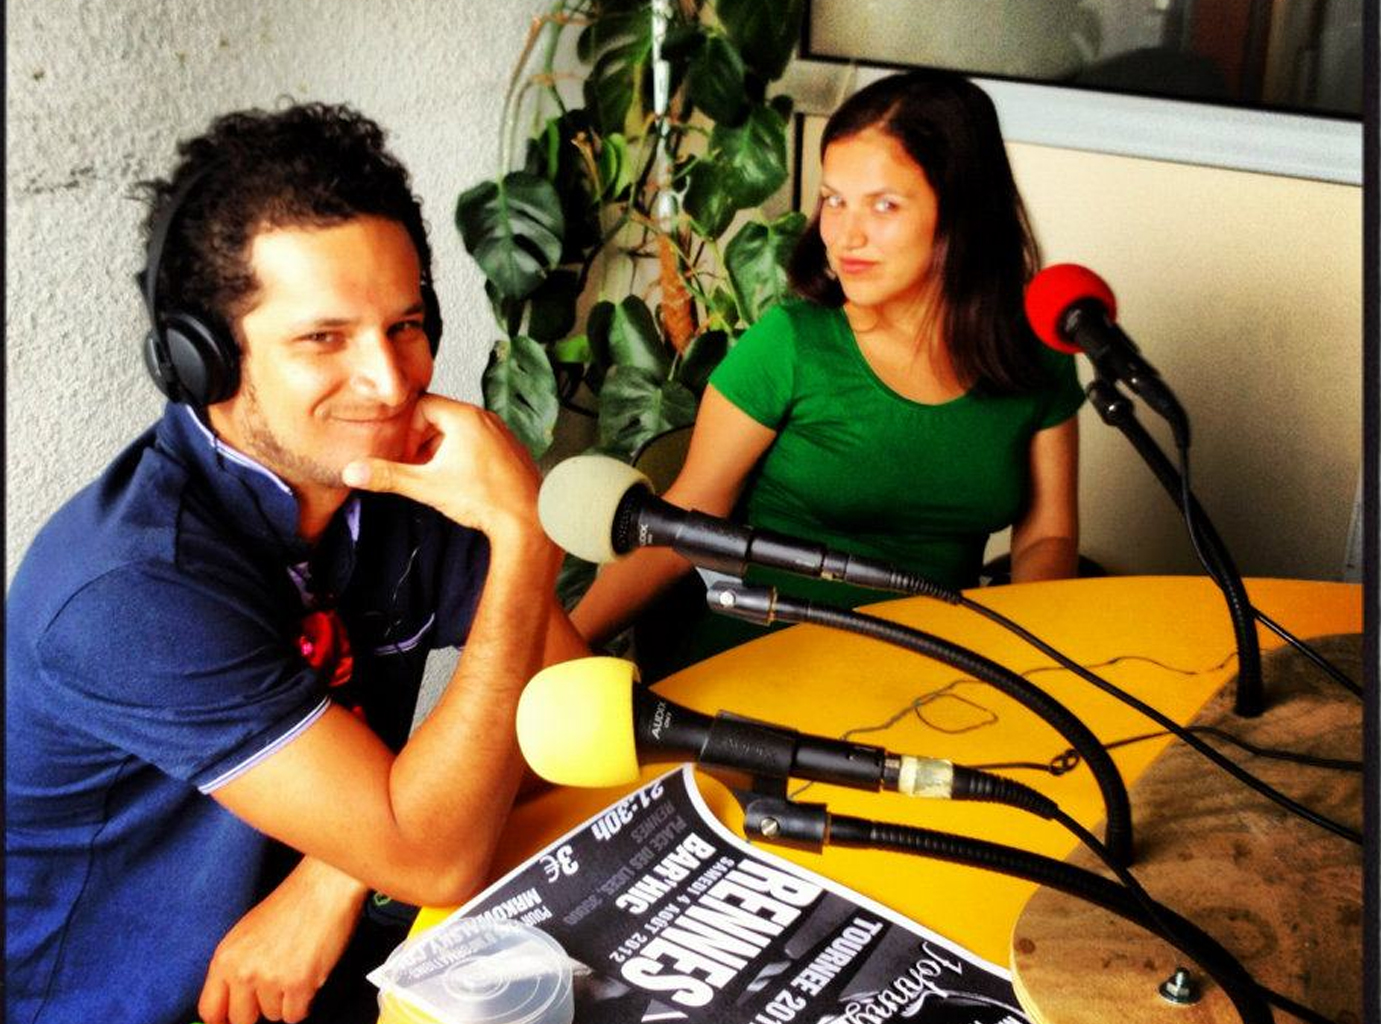 Radio interview with sister Naty Cerdas, Rennes, FR, 2013